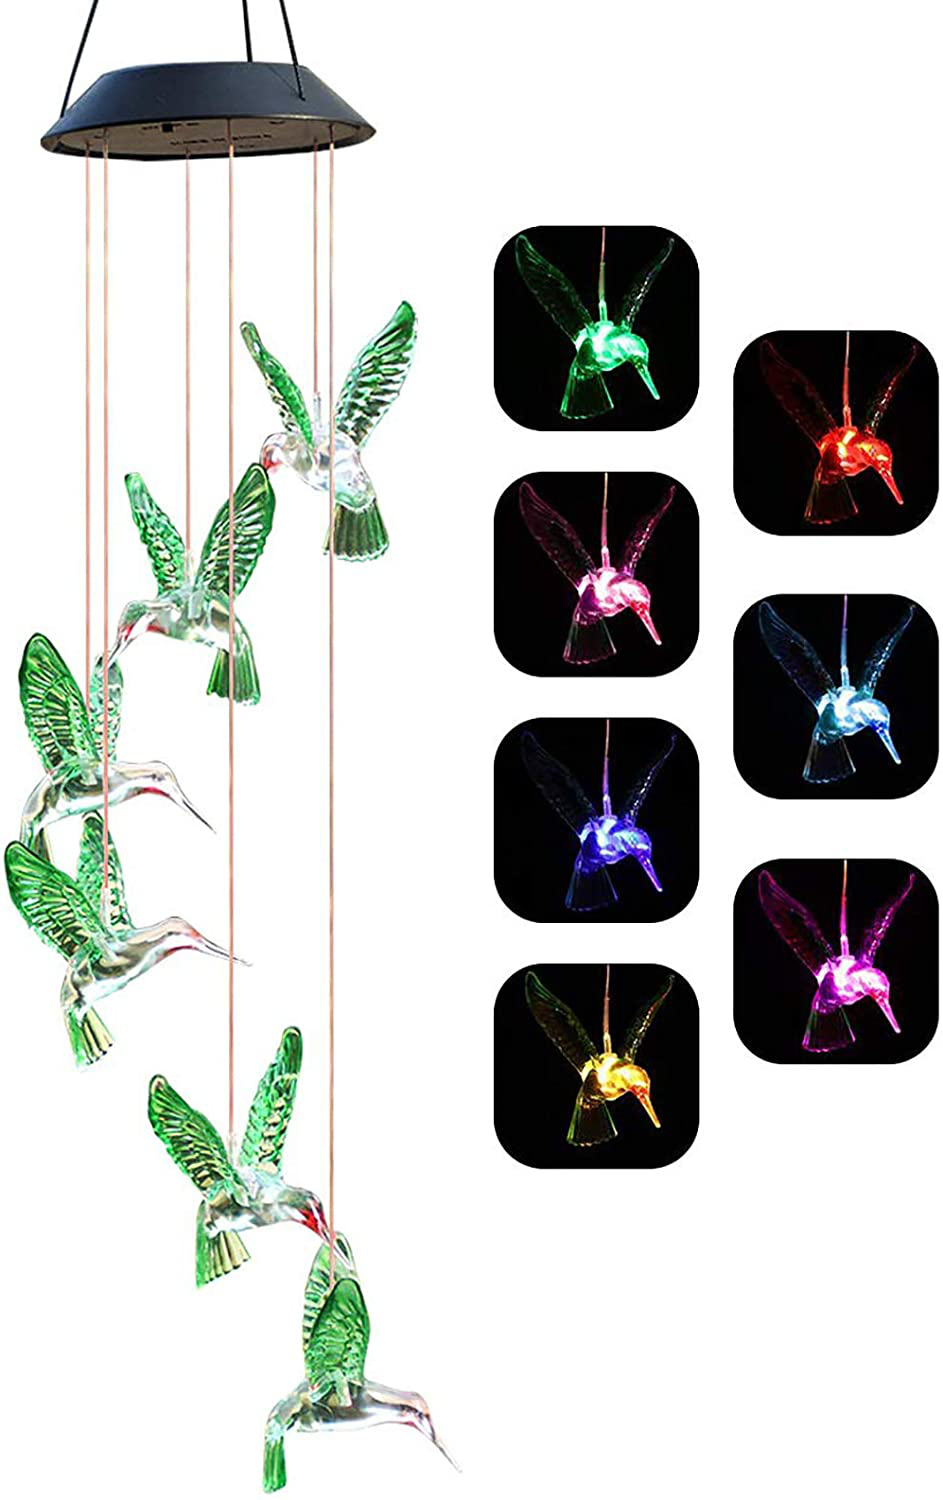 Chasgo Solar Hummingbird Wind Chime Color Changing Solar Mobile Wind Chime Outdoor Mobile Hanging Patio Light